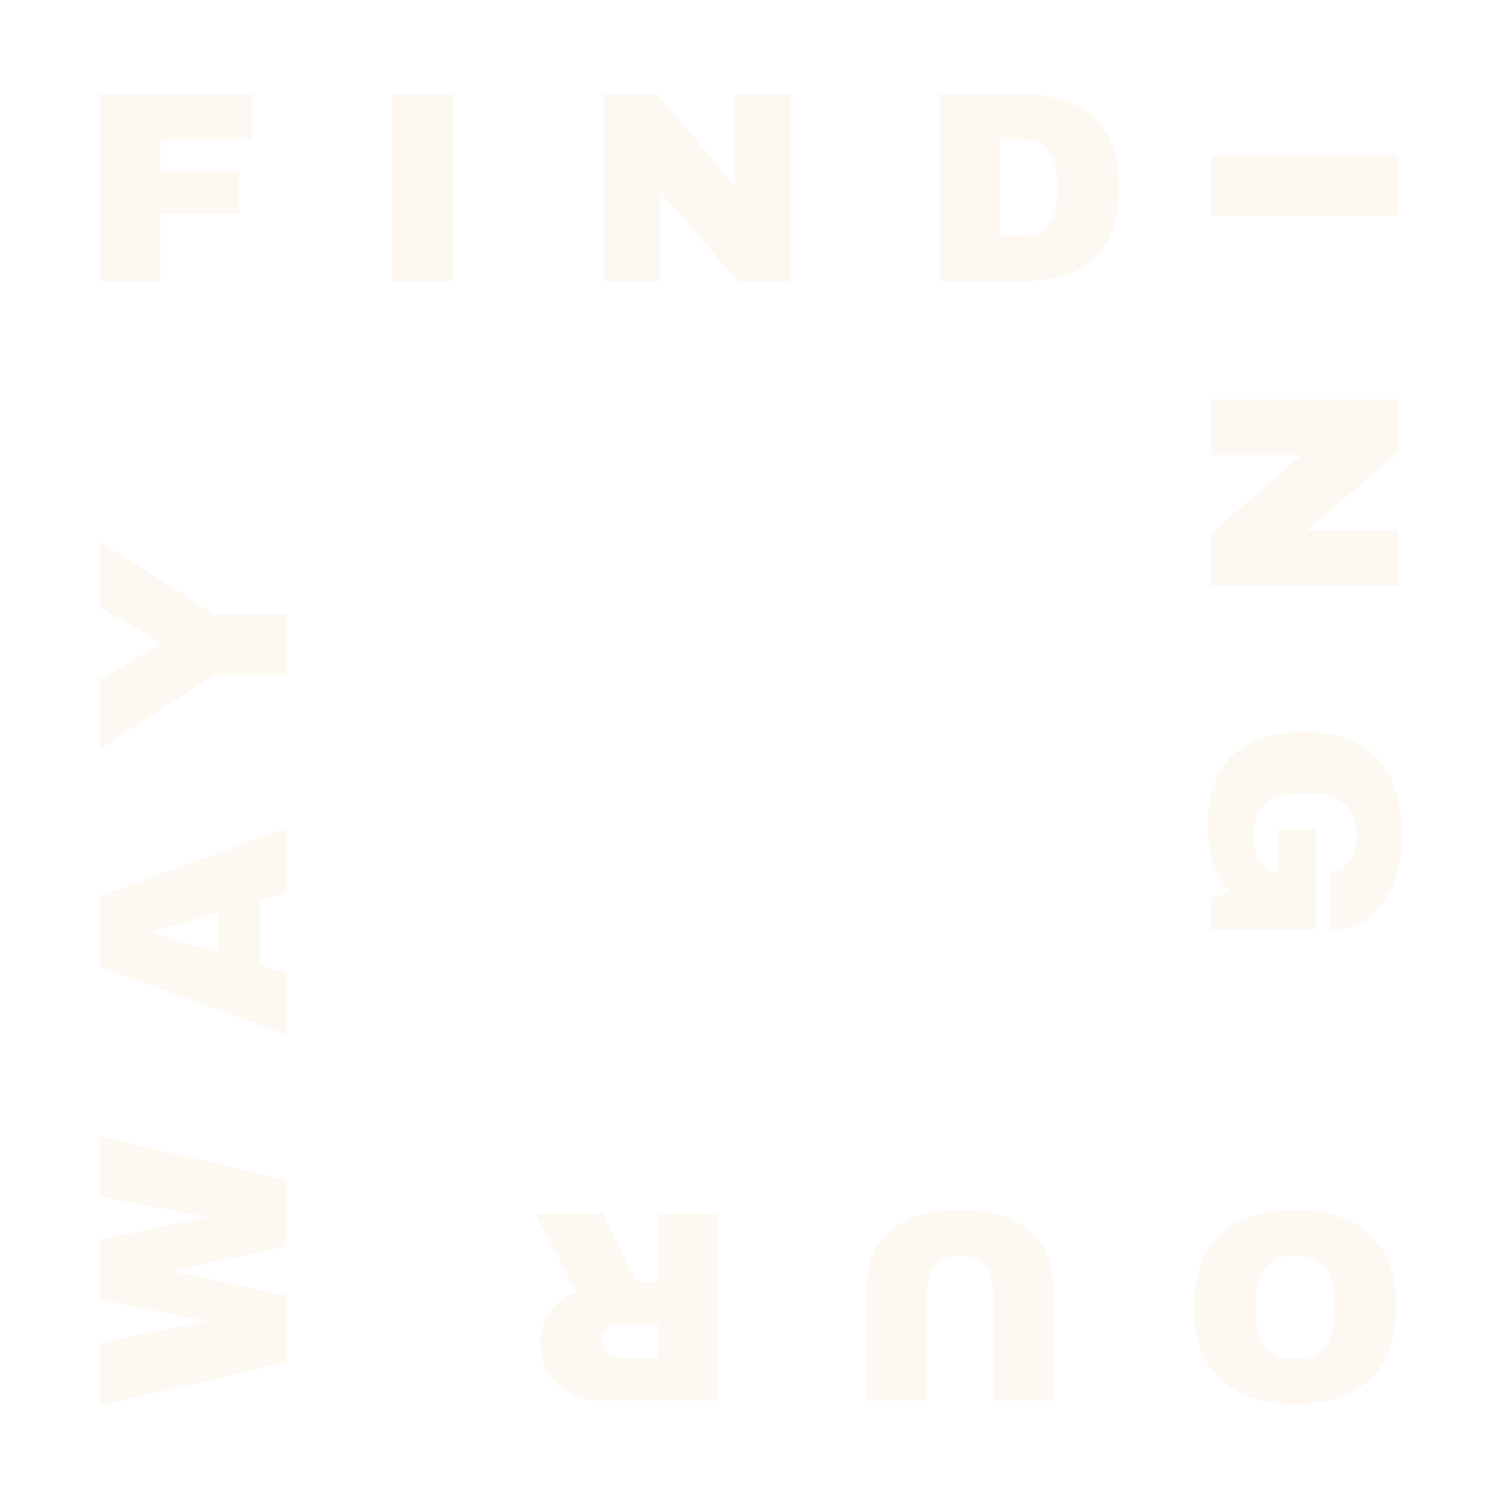 Finding Our Way Podcast